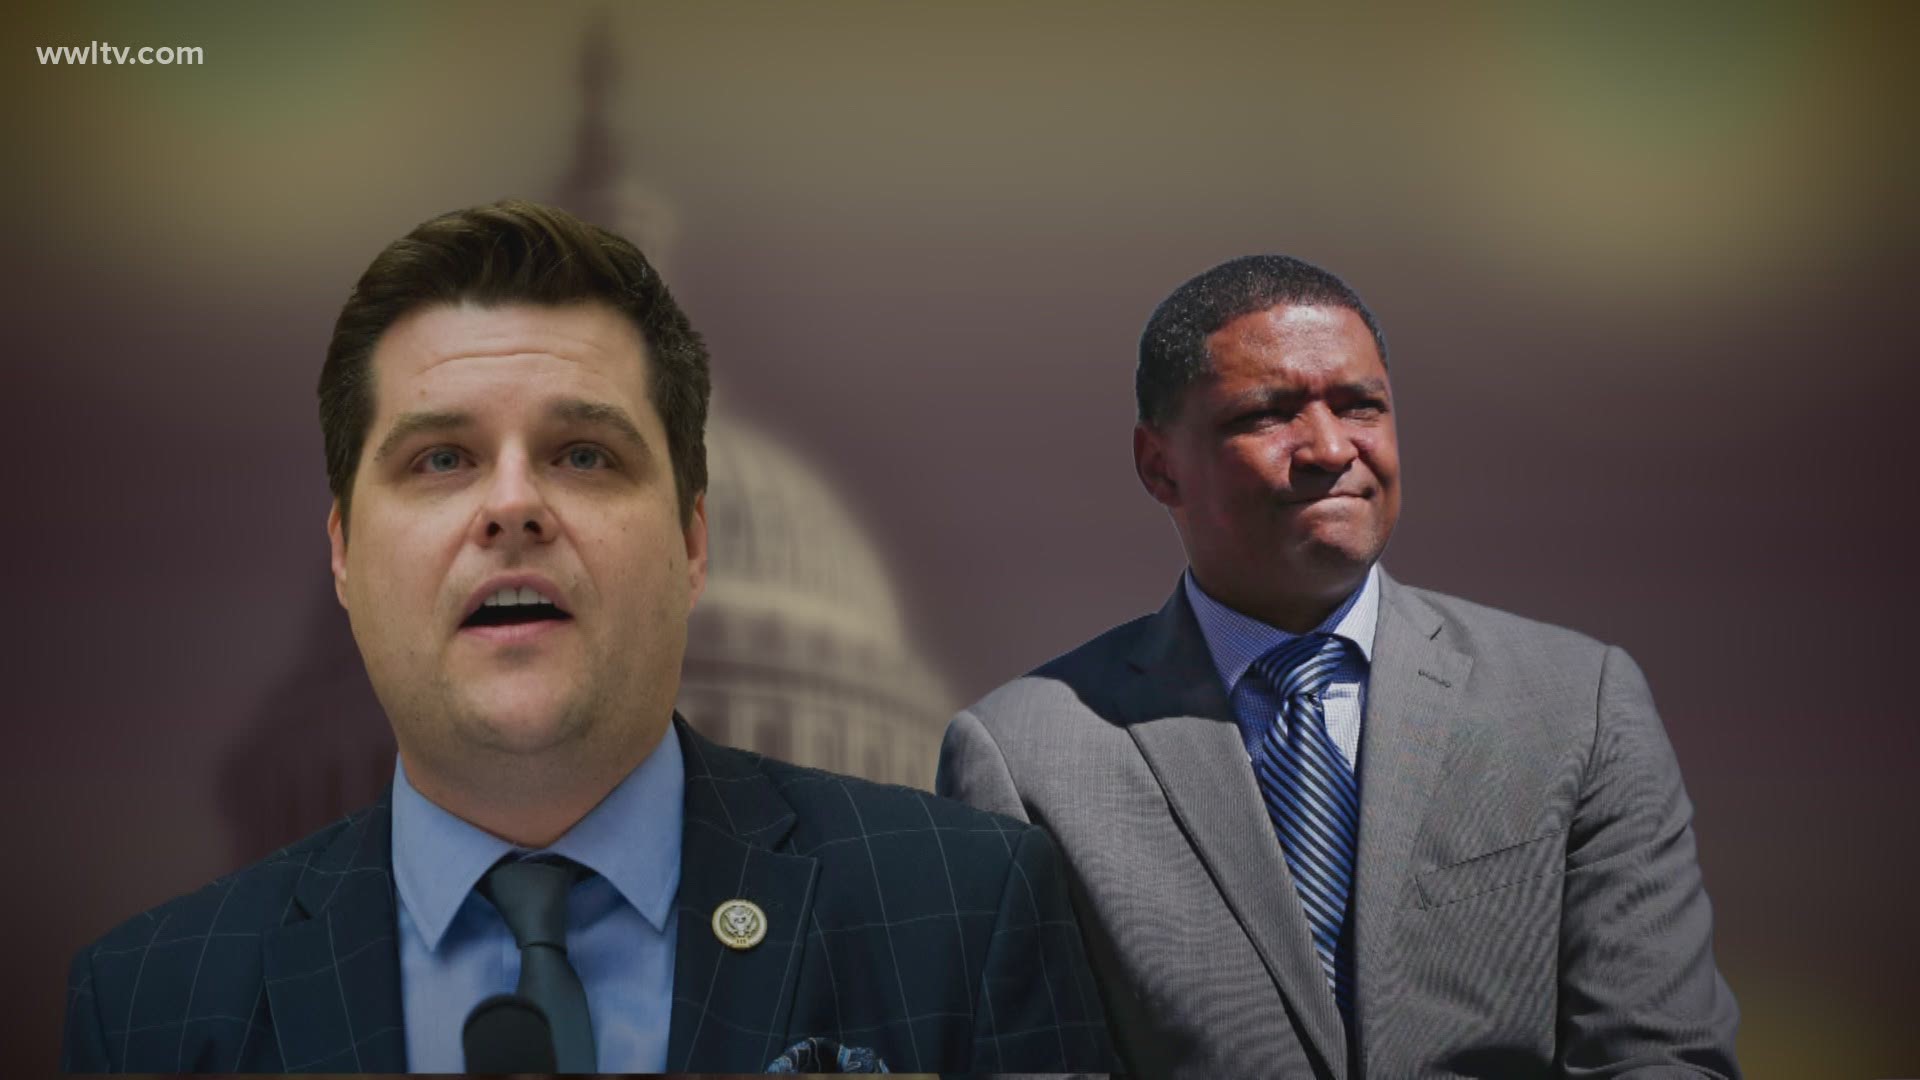 “You all are white males.  You never lived in my shoes.  You do not know what it’s like to be an African-American male,” said Rep. Richmond, D, New Orleans.